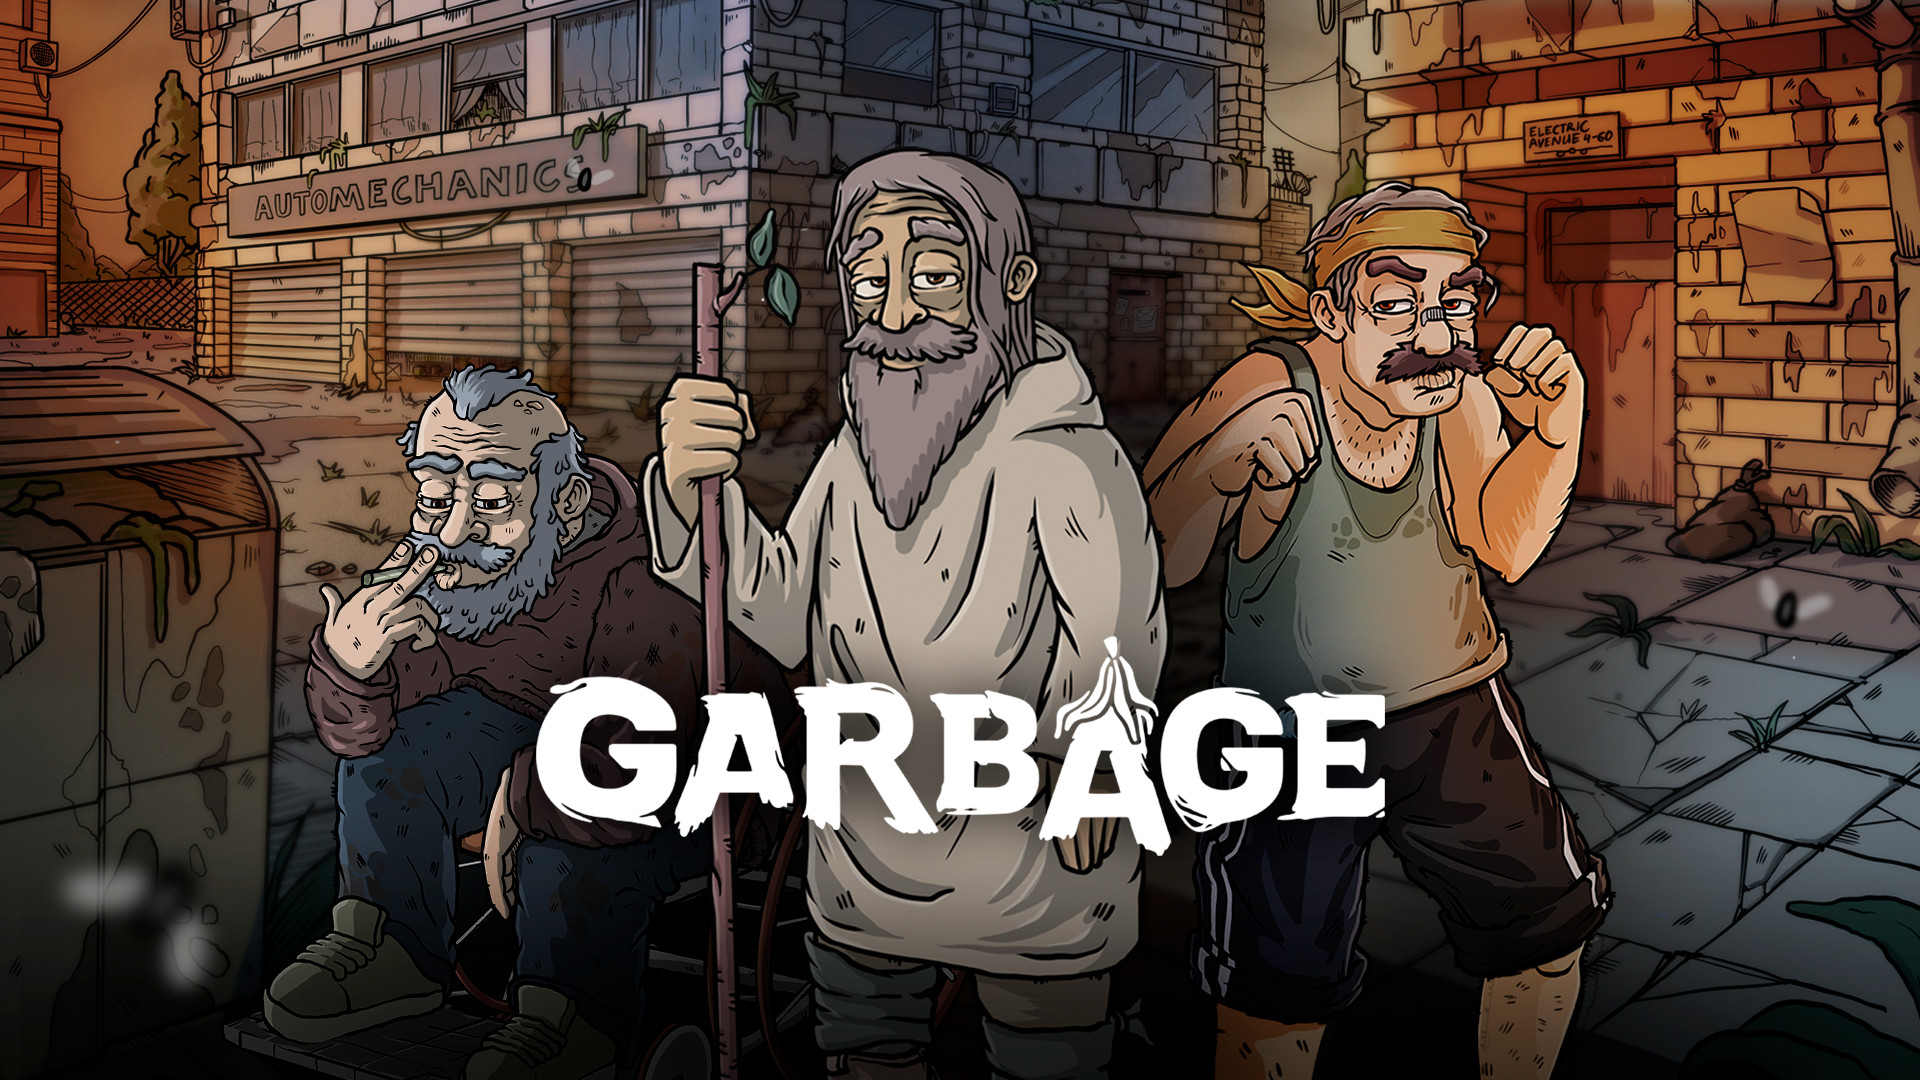 Garbage Soundtrack (Beat-tape) Featured Screenshot #1